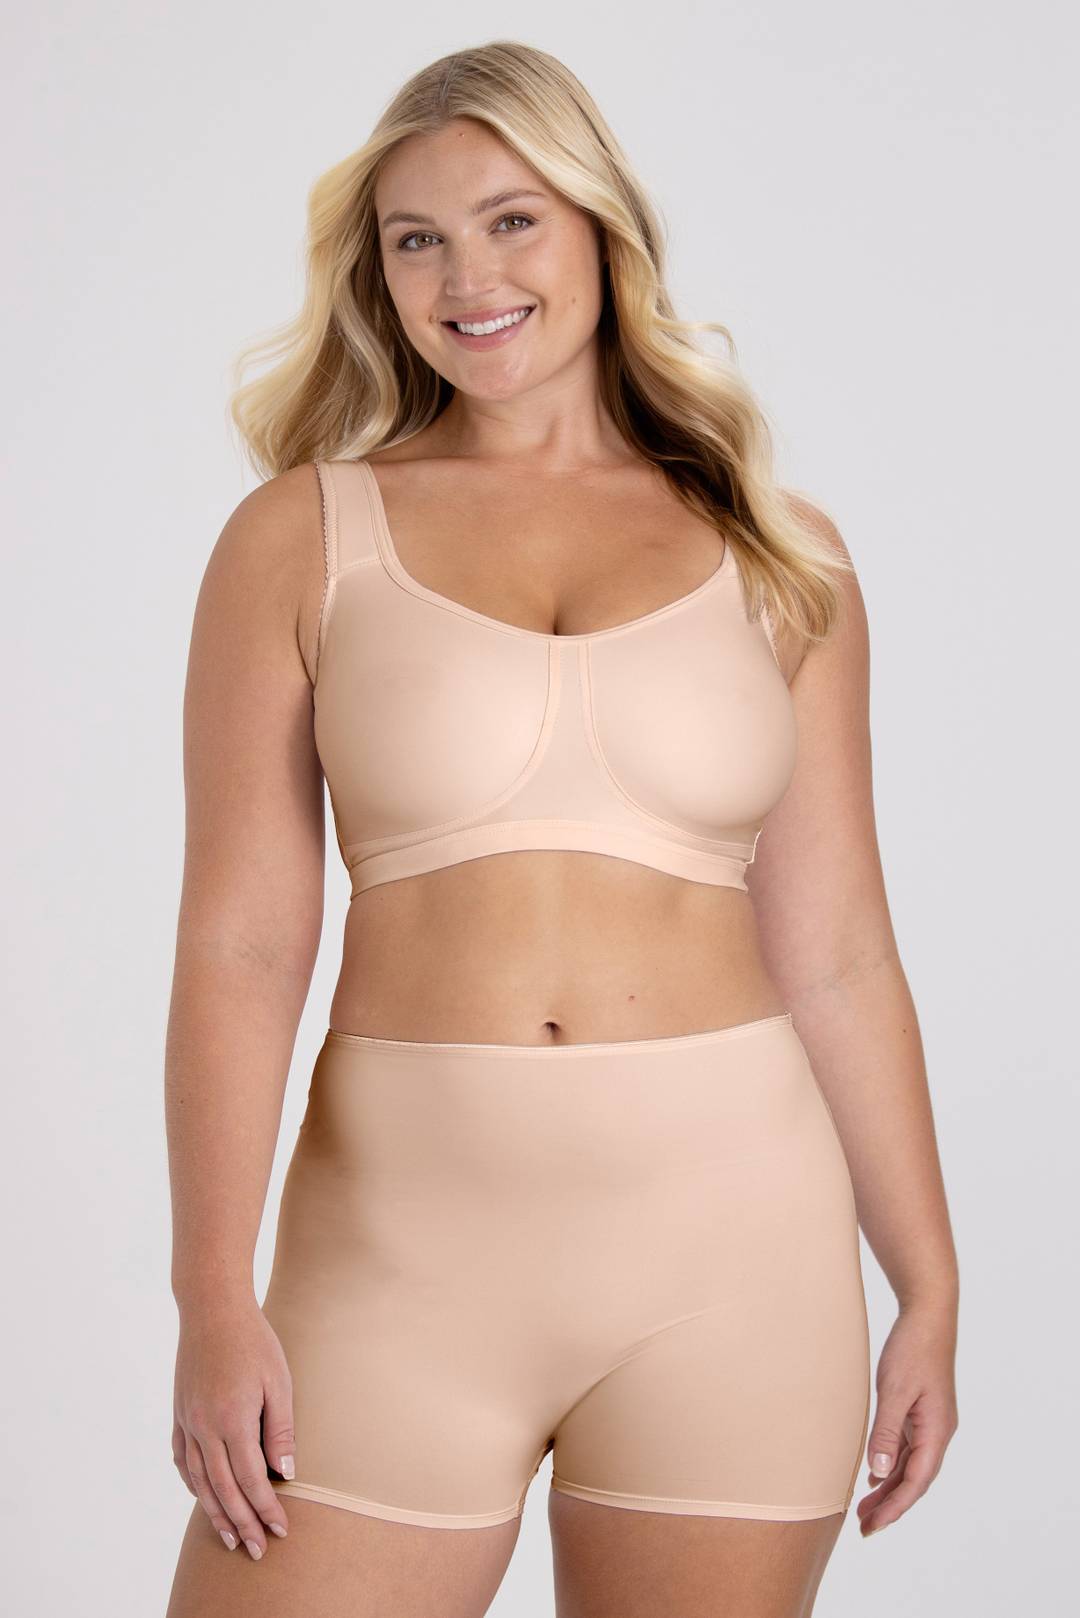 Keep Fresh non-wired bra – feel comfortable and safe all day thanks